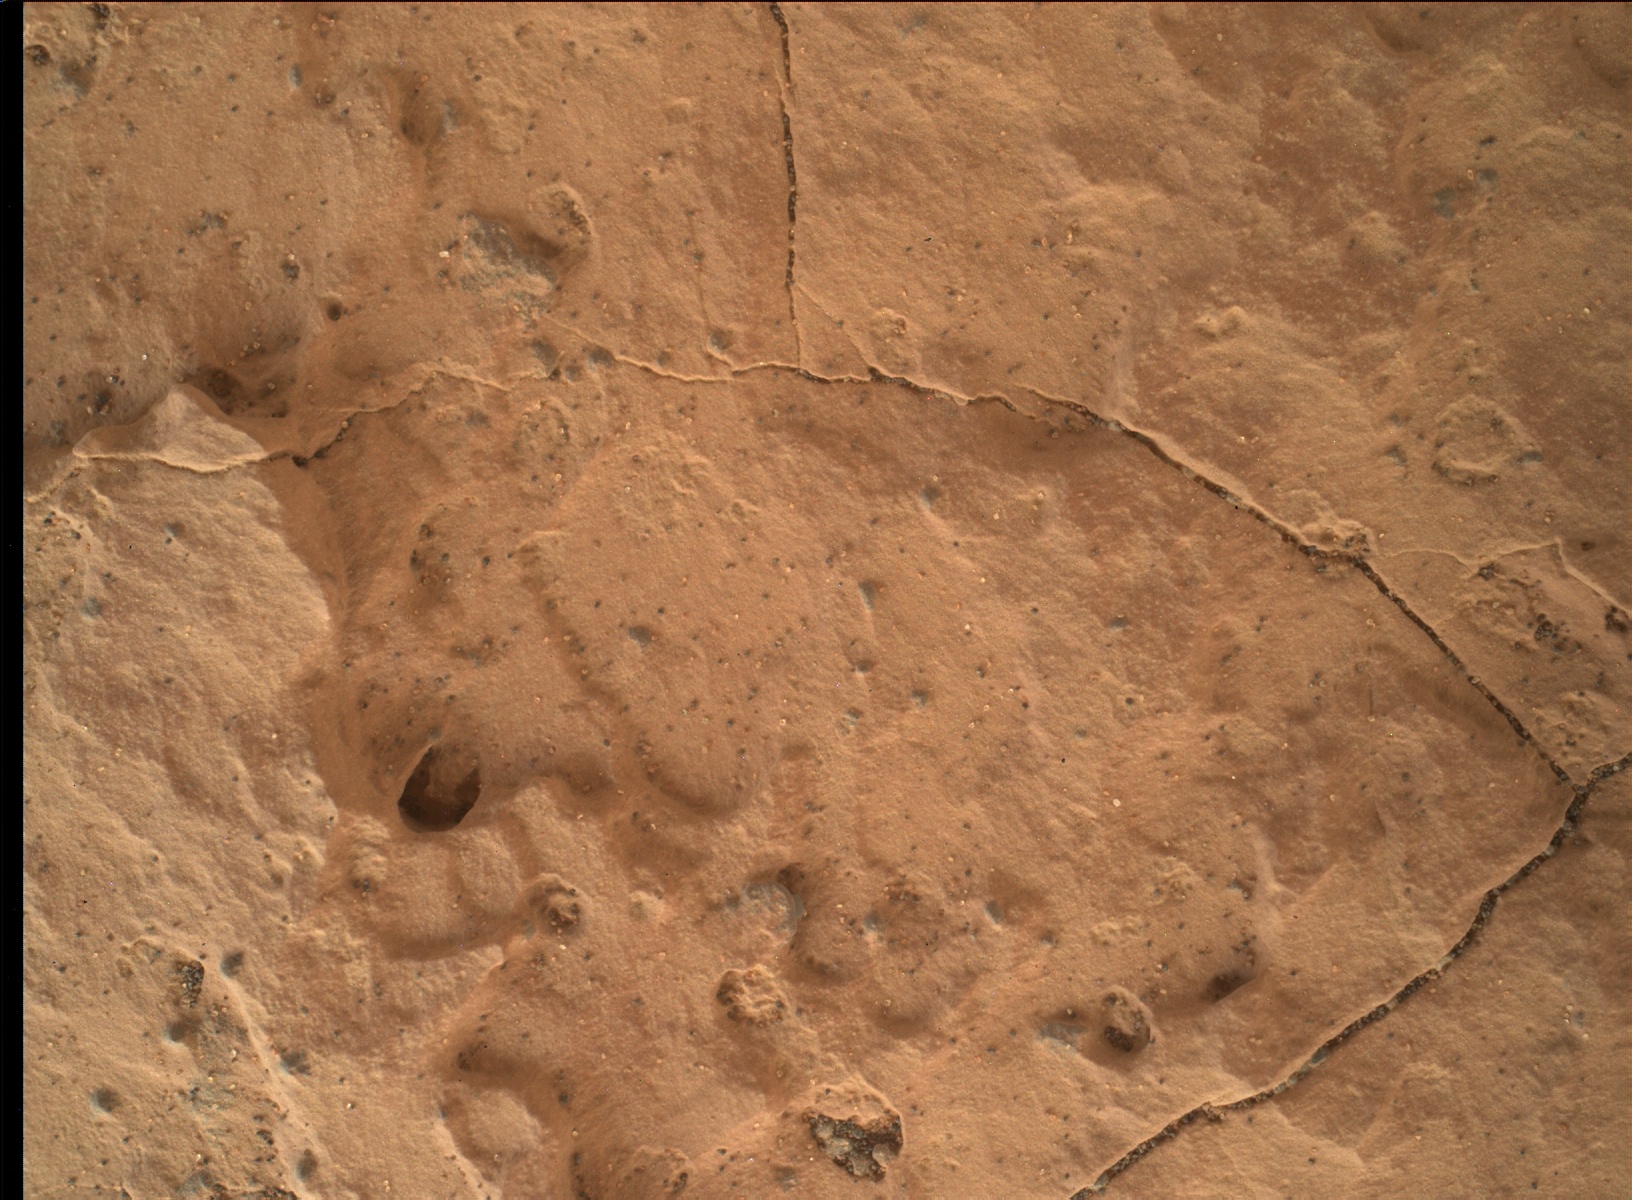 Nasa's Mars rover Curiosity acquired this image using its Mars Hand Lens Imager (MAHLI) on Sol 1640